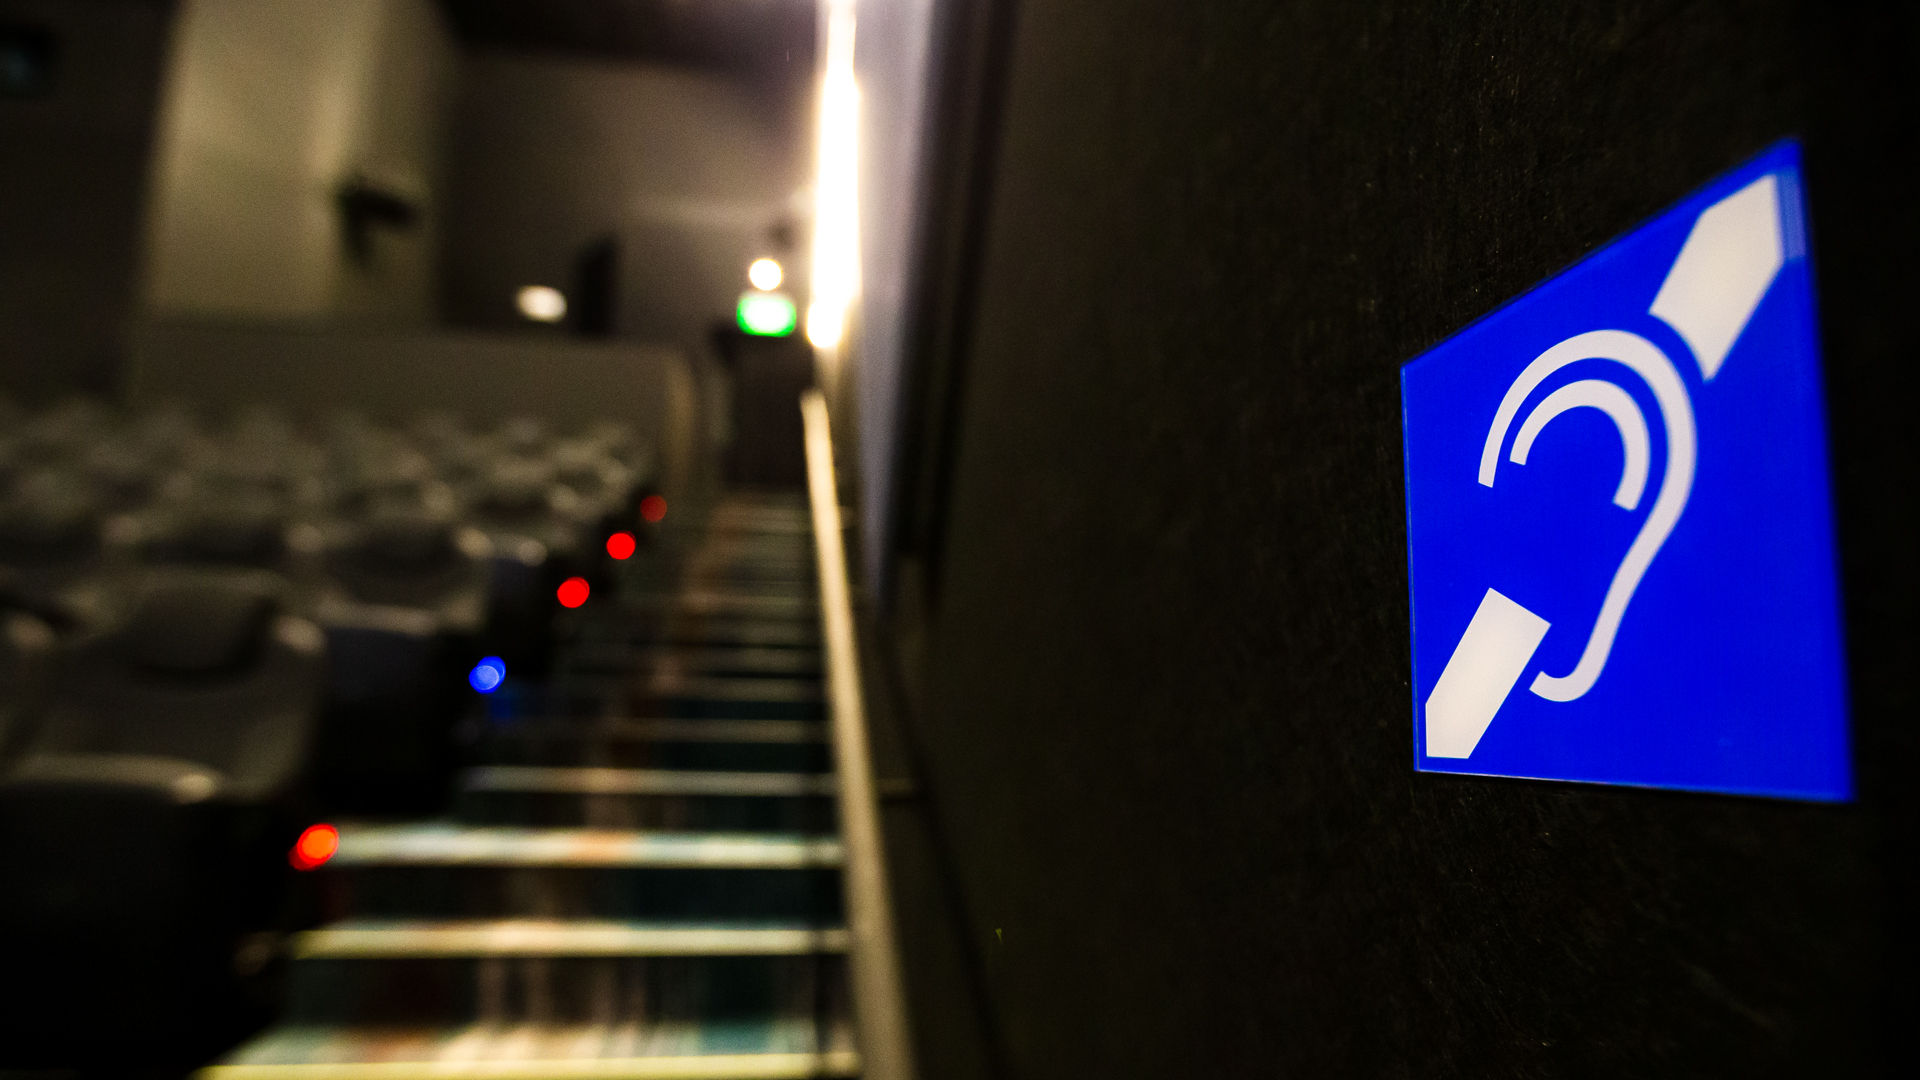 The cineplex is hearing-impaired friendly